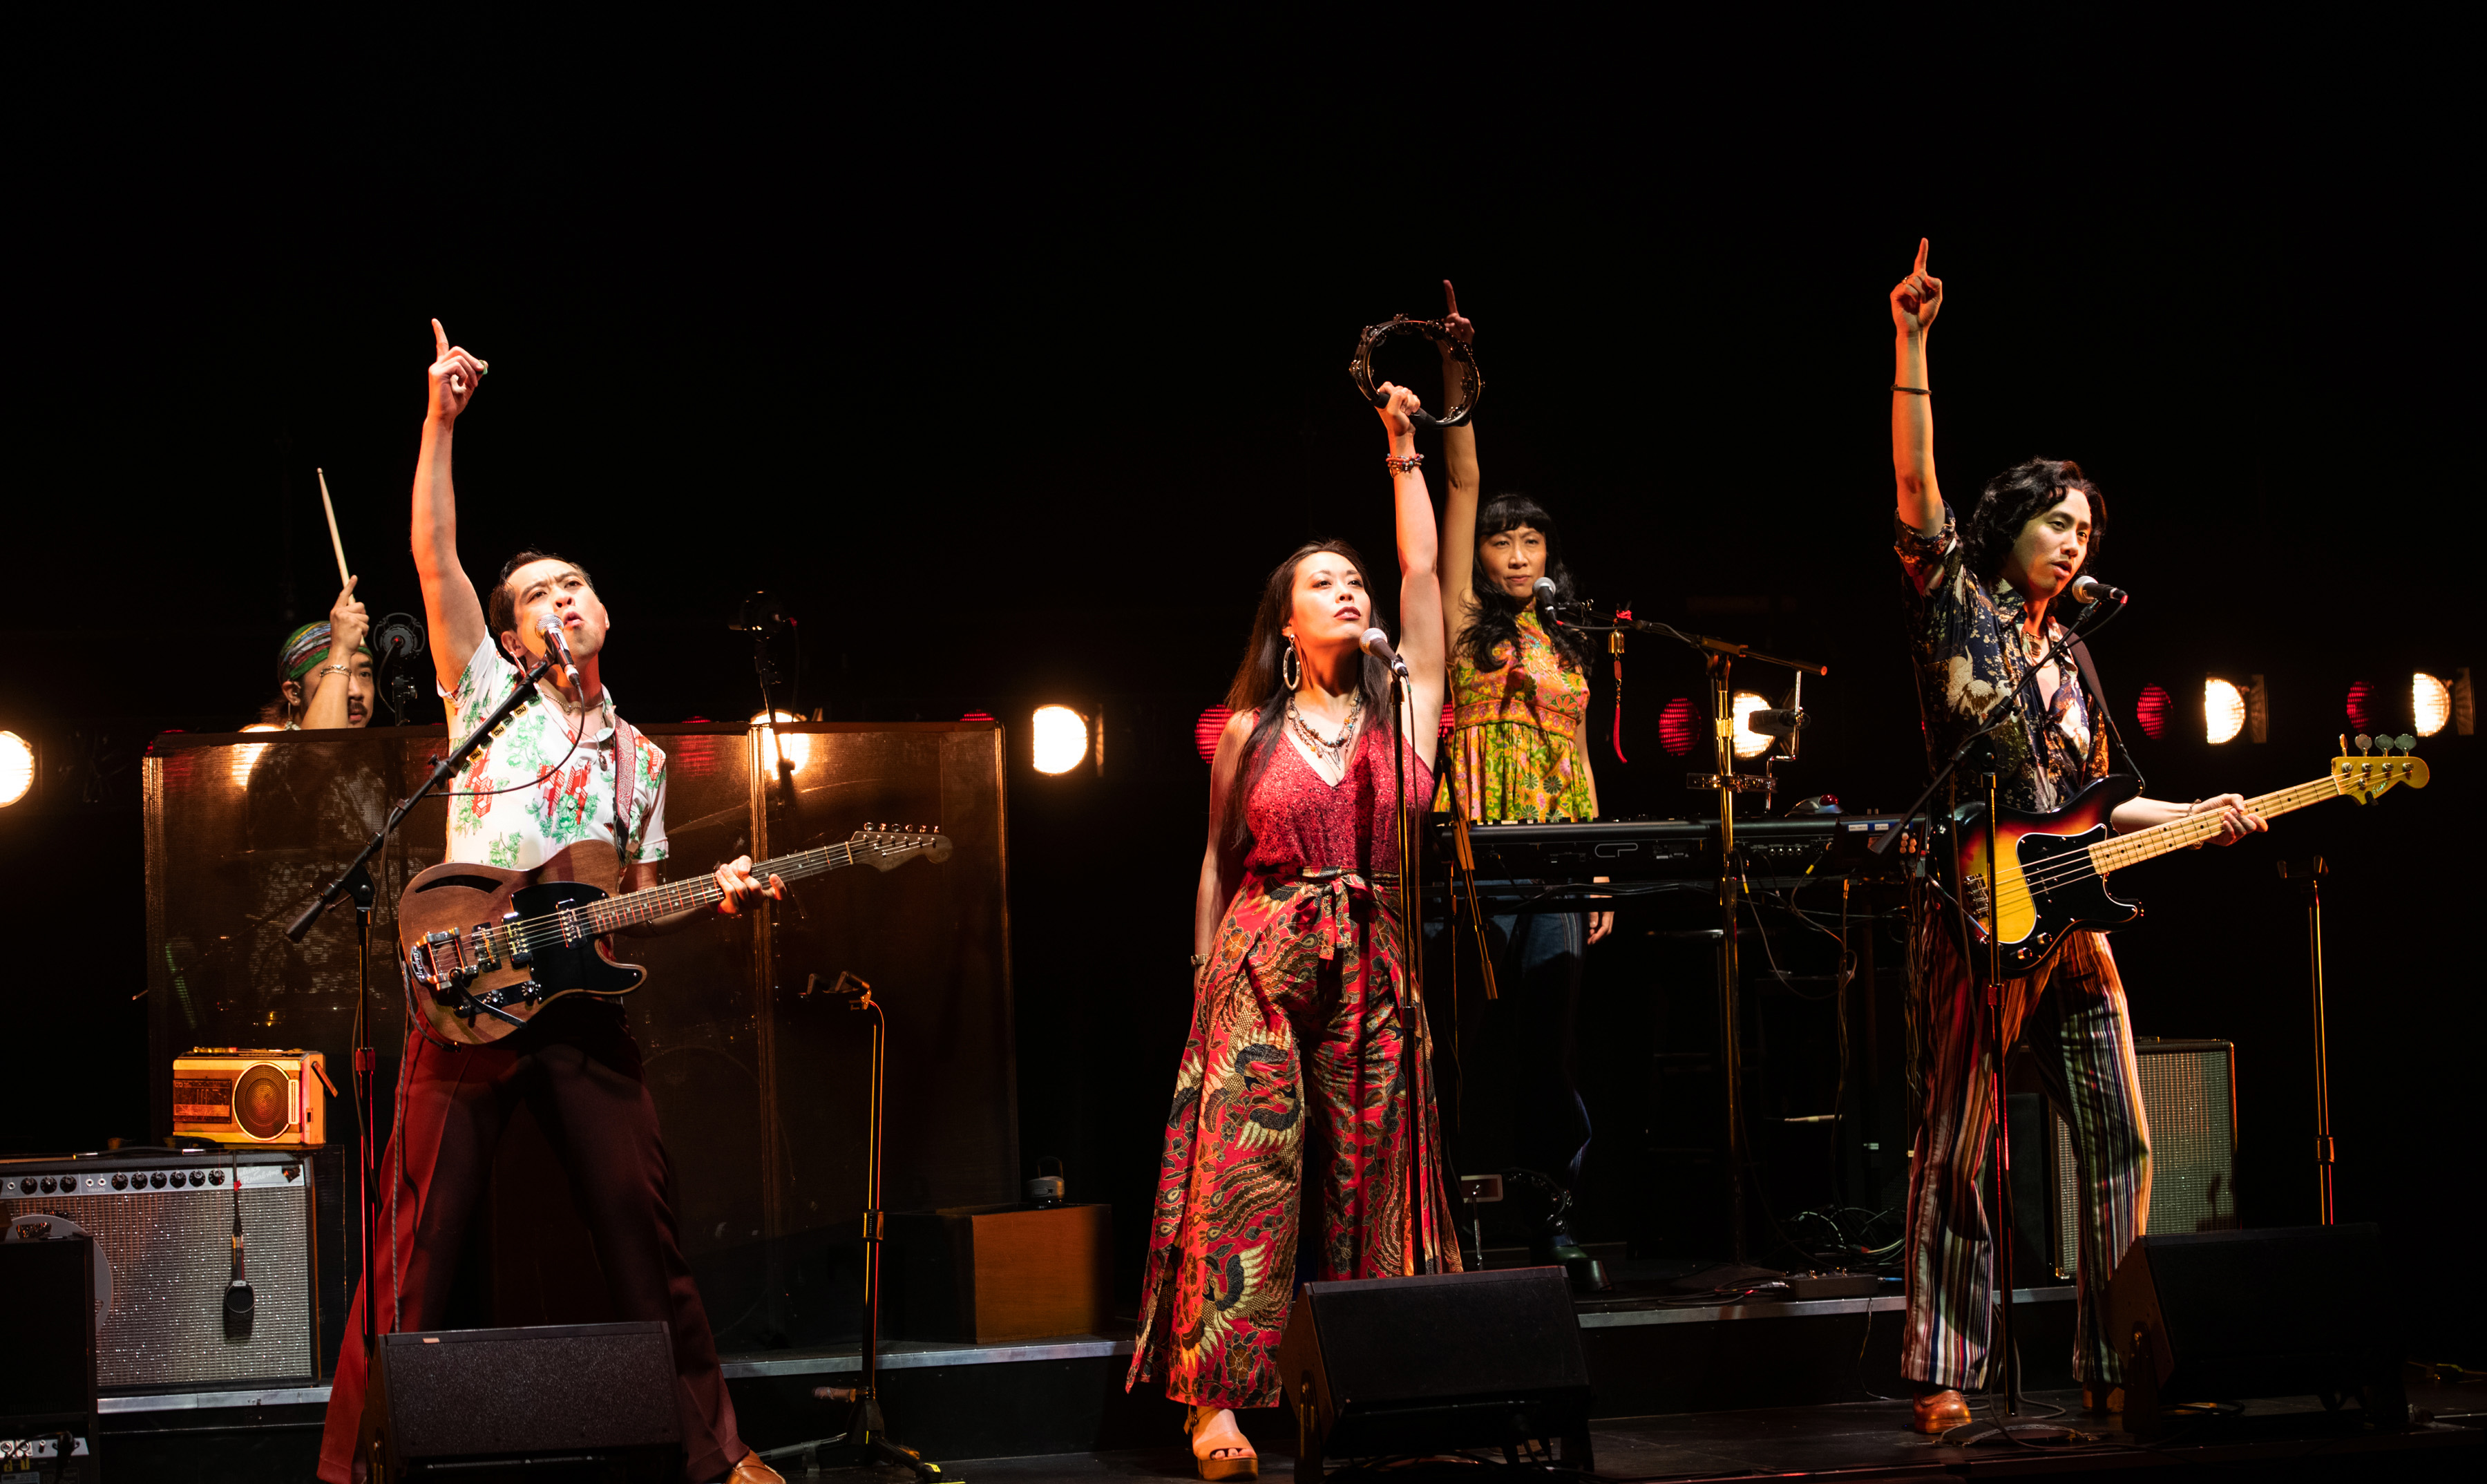 Abraham Kim, Joe Ngo, Brooke Ishibashi, Jane Lui, and Tim Liu in Cambodian Rock Band at Arena Stage at the Mead Center for American Theater running July 19 through August 27. Photo by Margot Schulman.